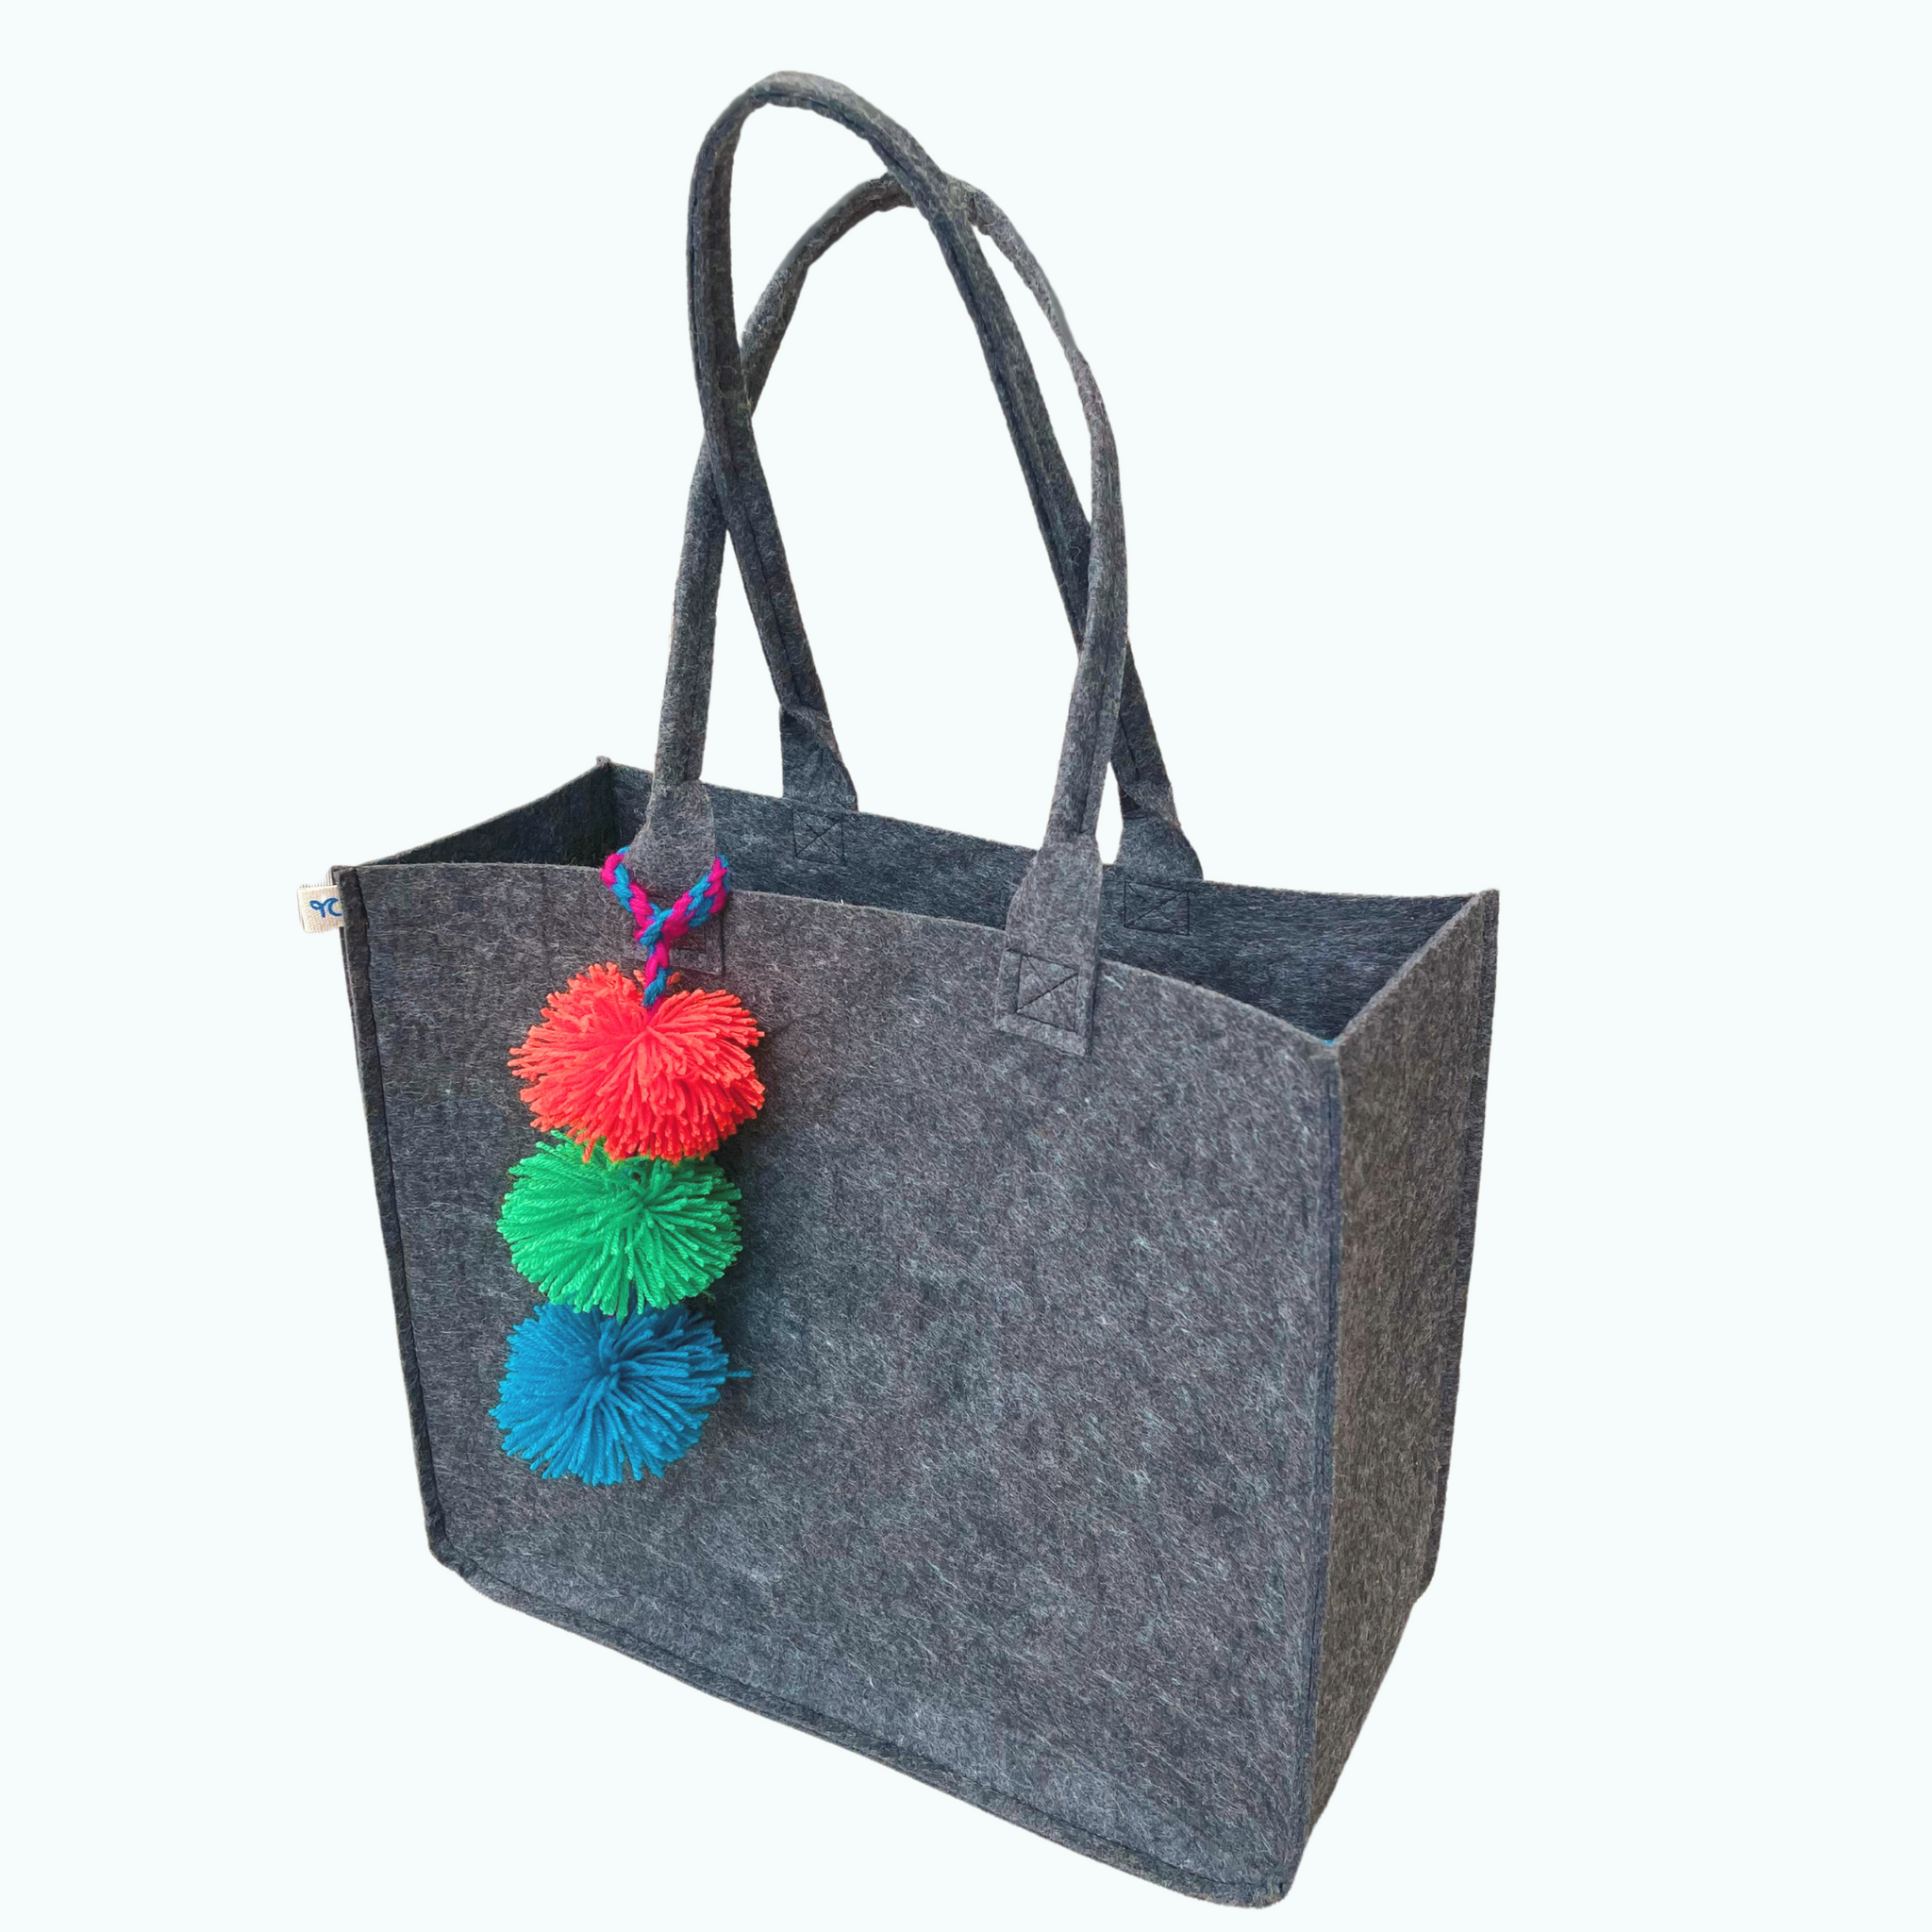 Eco-friendly Tote Bag Handmade with Soft Felt Fiber from Recycled